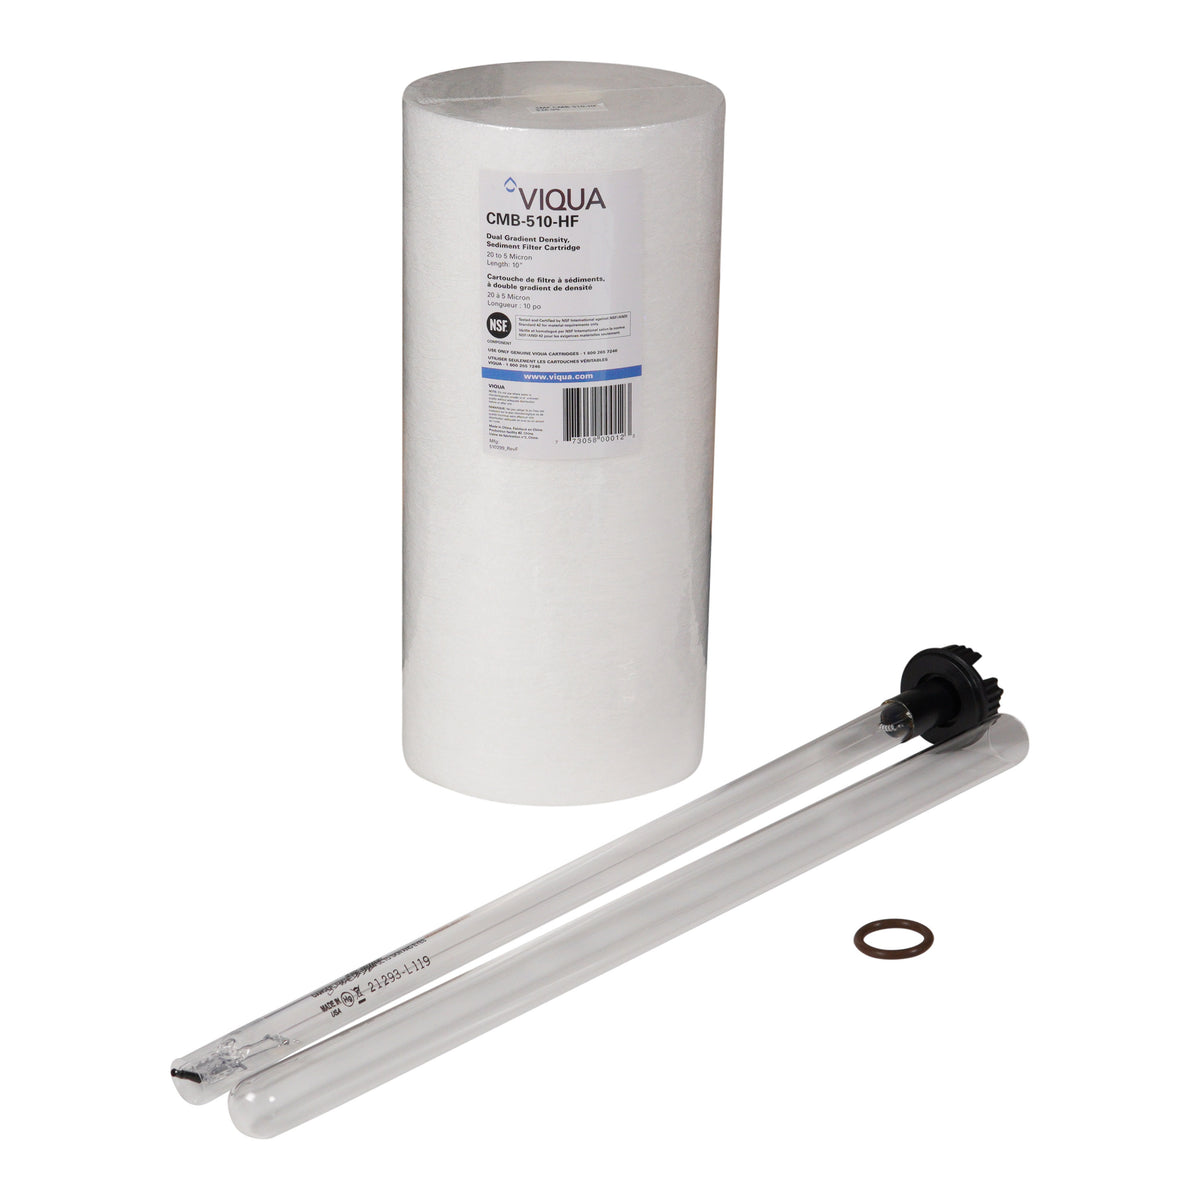 Viqua IHS10-D4 Replacement UV Lamp, Sleeve and Filter | Free Ship